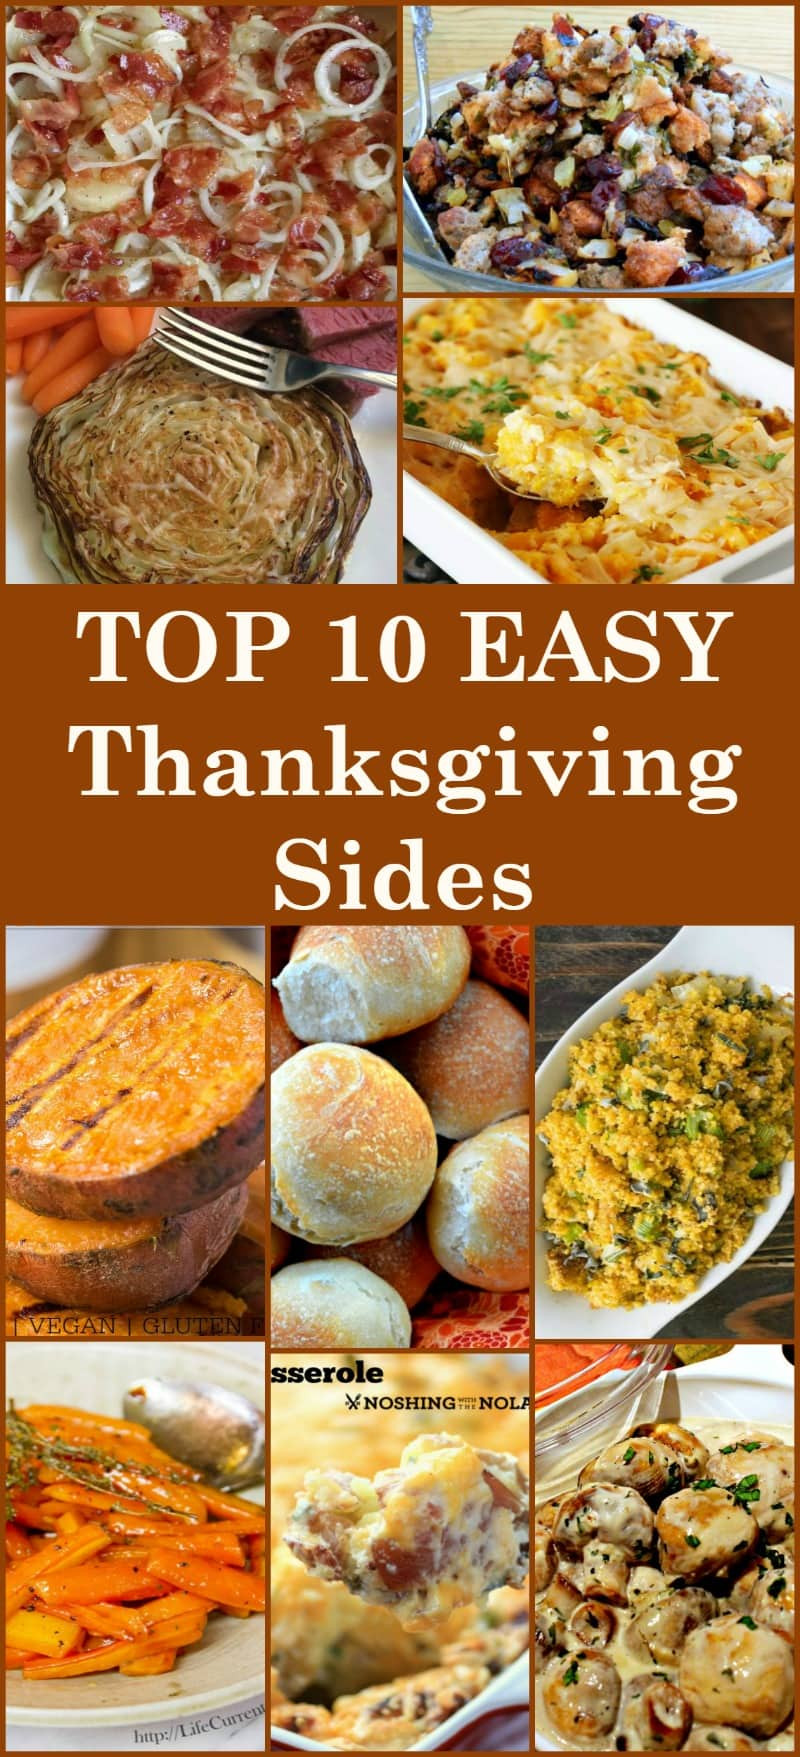 Make Ahead Sides For Thanksgiving
 The BEST Top 10 Thanksgiving Sides